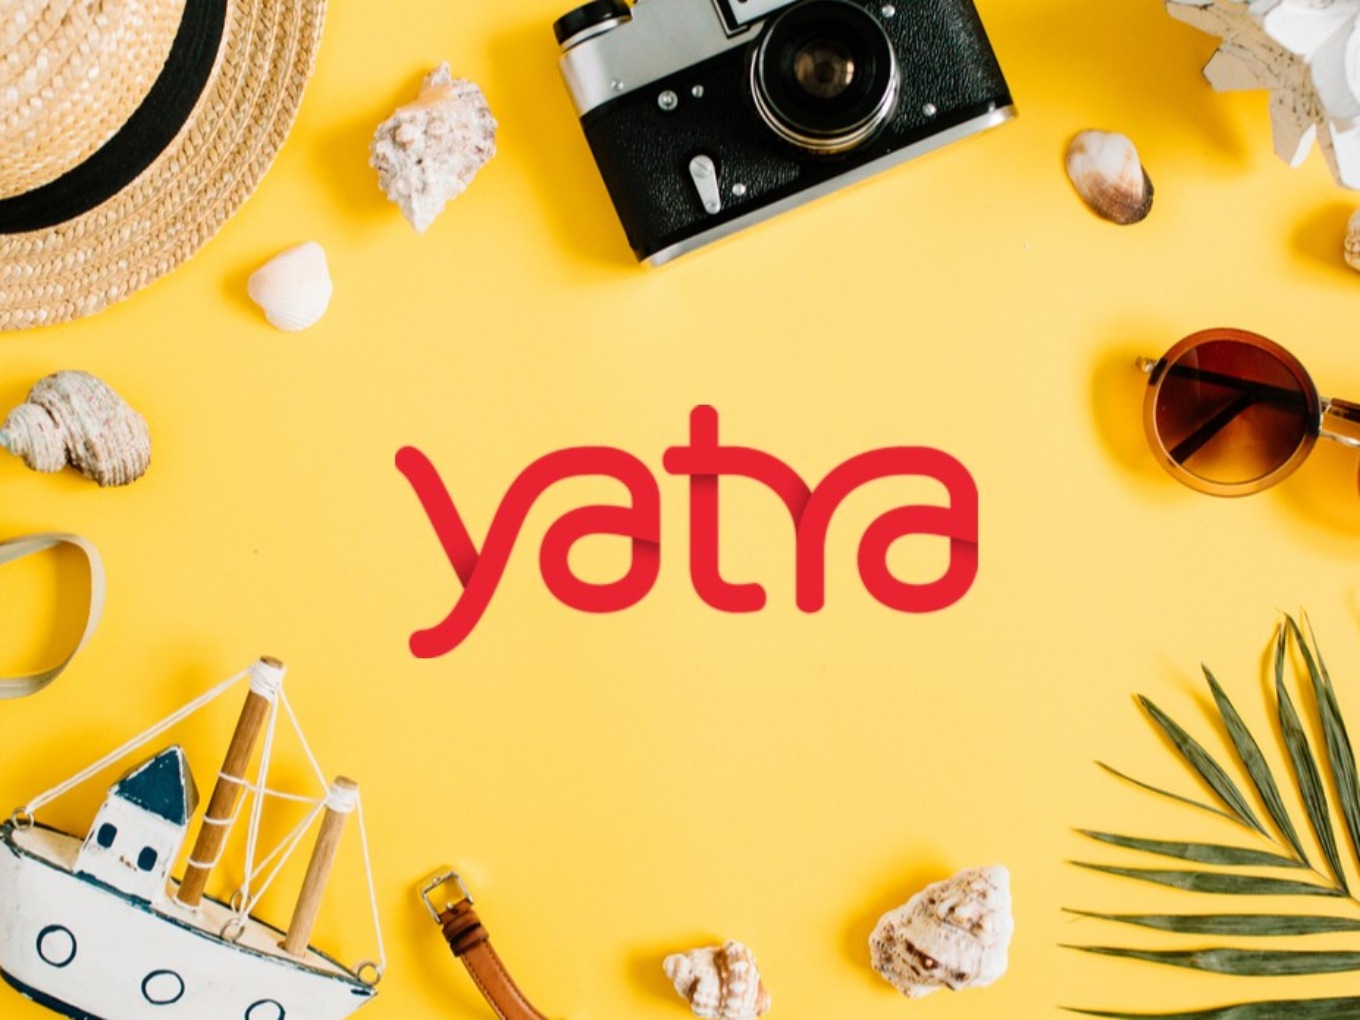 You are currently viewing Yatra Reports 64% QoQ Increase In Revenue in Q4 FY21